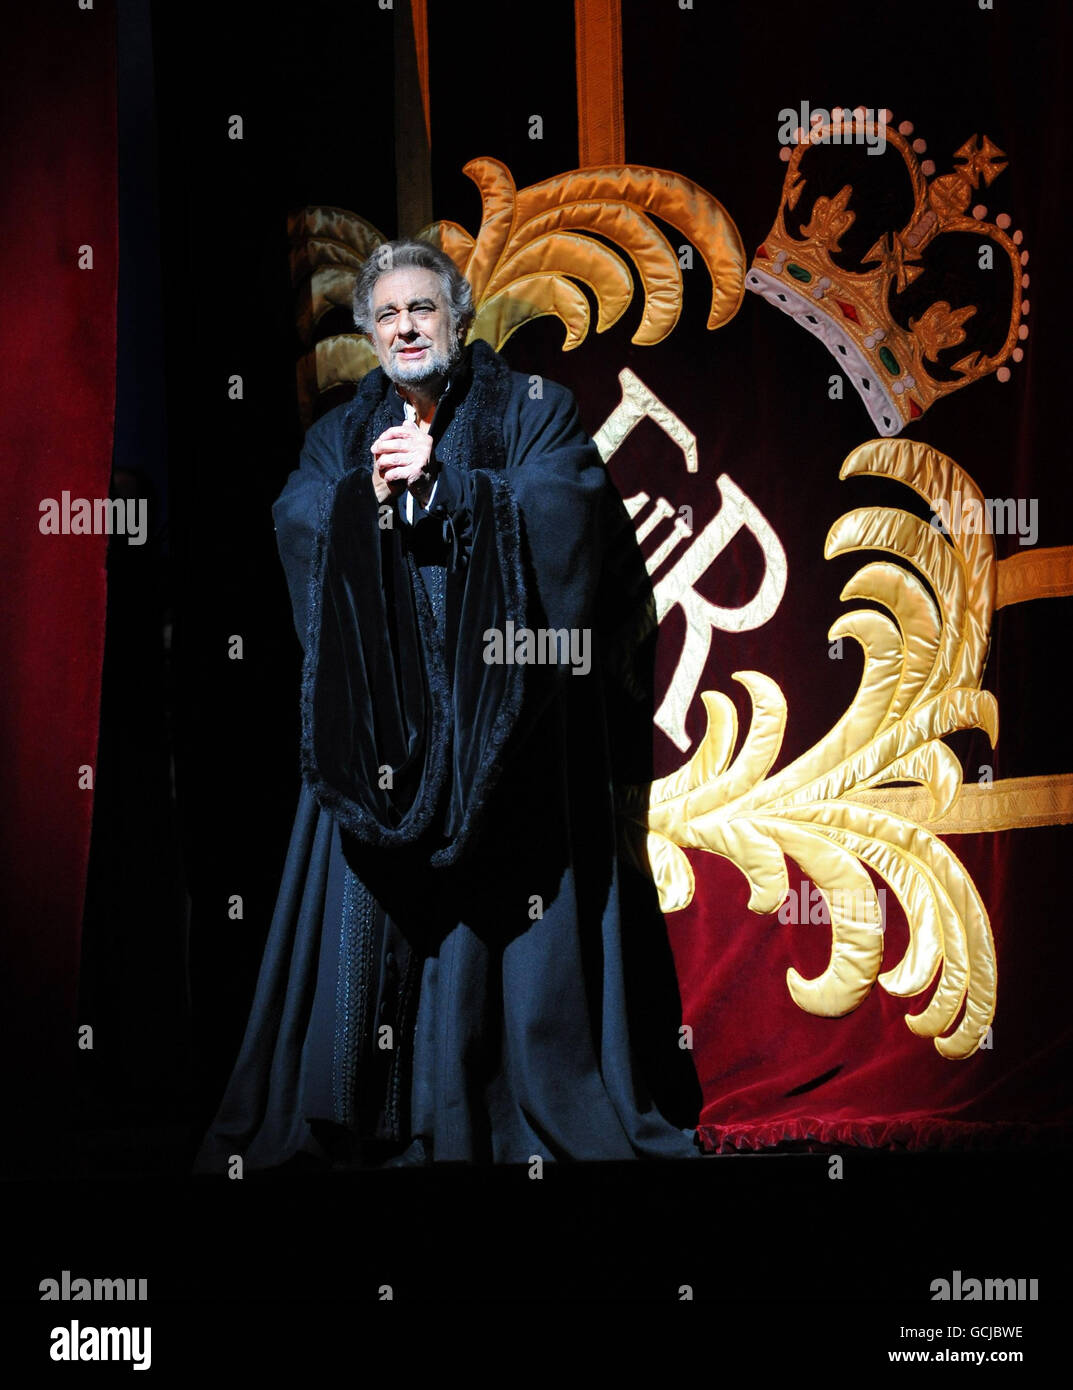 Placido Domingo takes a curtain call after performing in Verdi's Simon Boccanegra at the Royal Opera House in London - his 225th performance at the famous venue. The Spanish tenor sung in barritone, as demanded by the role. Stock Photo